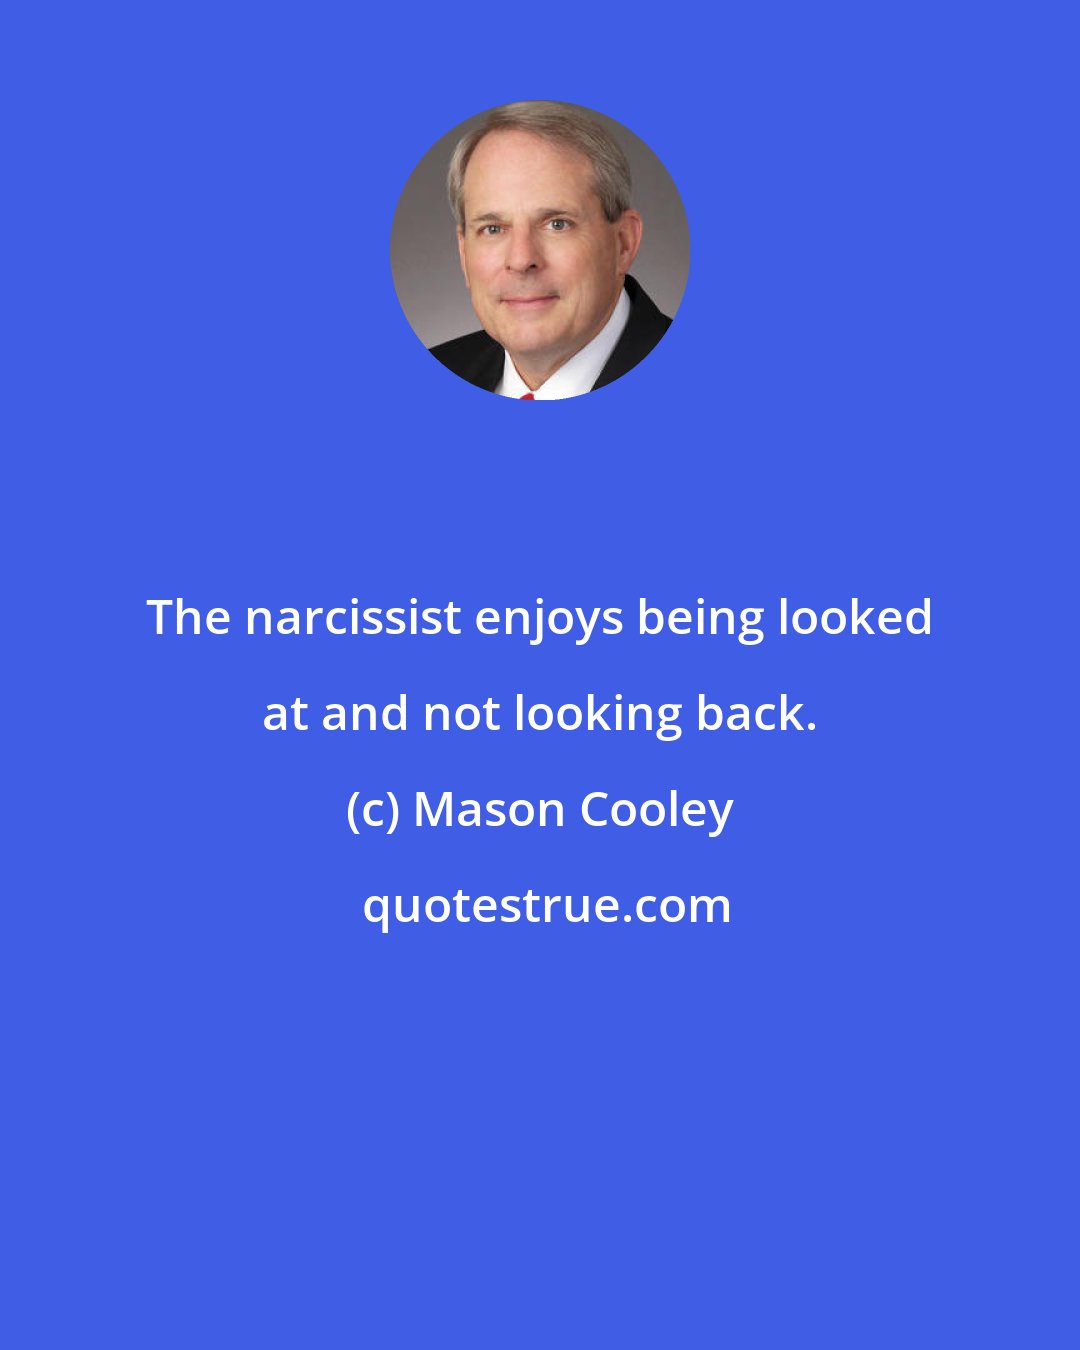 Mason Cooley: The narcissist enjoys being looked at and not looking back.